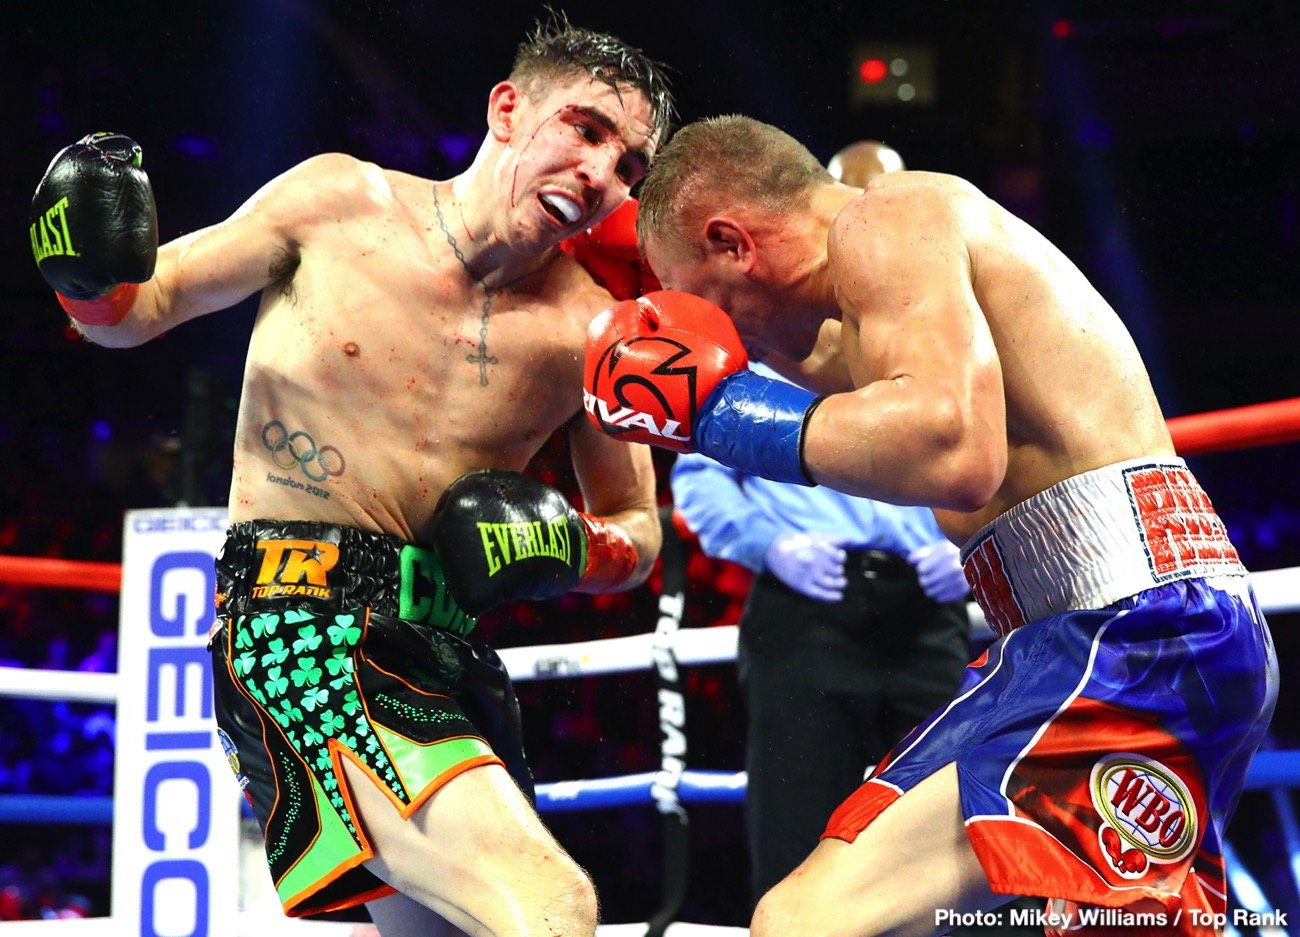 Image: Michael Conlan suffers ankle injury, won't fight Isaac Dogboe on Dec.5